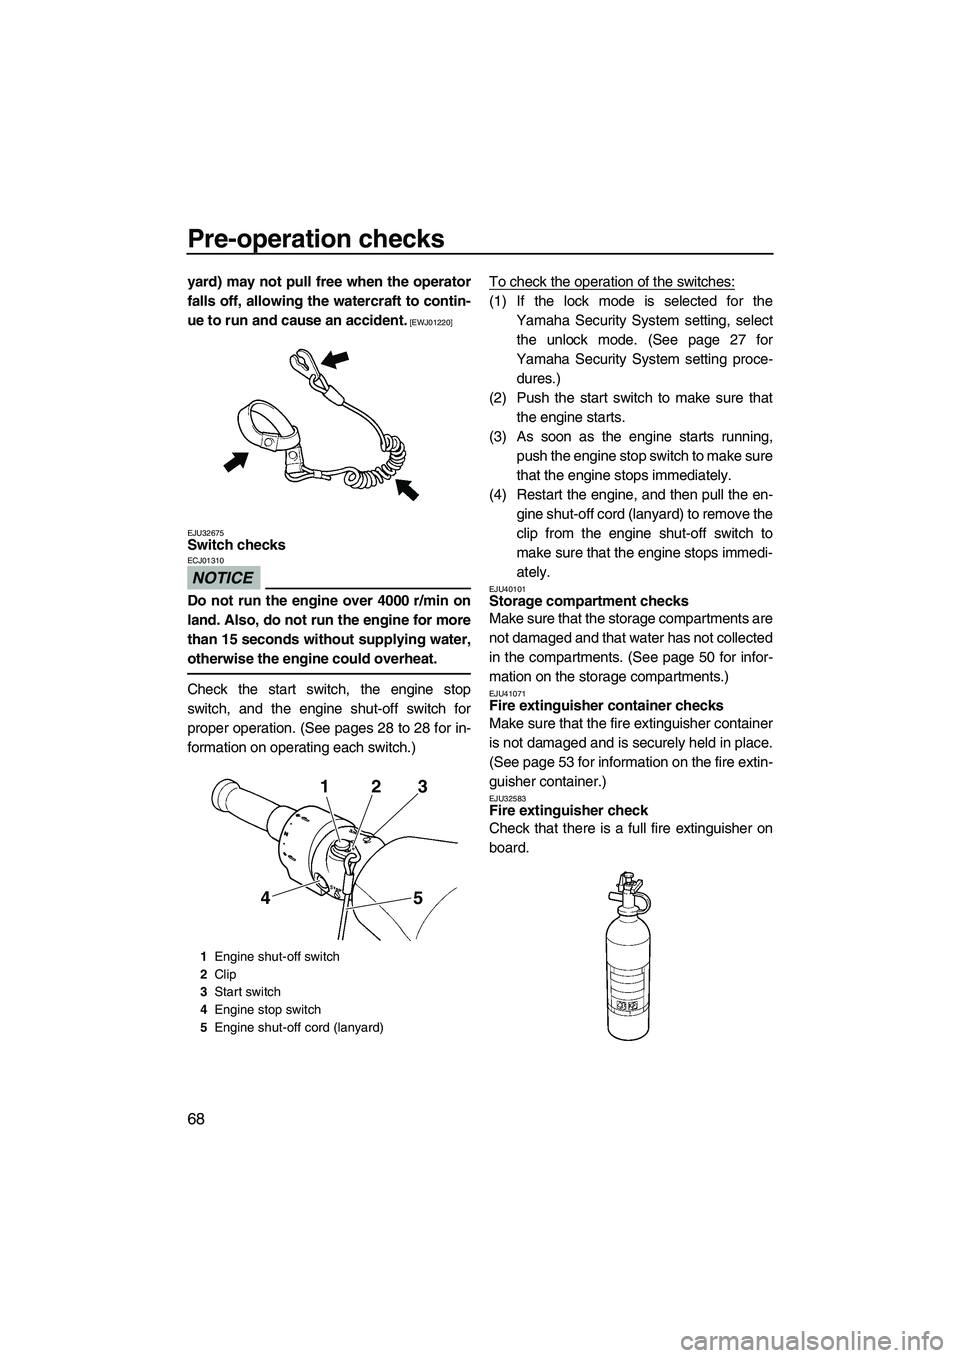 YAMAHA SVHO 2011  Owners Manual Pre-operation checks
68
yard) may not pull free when the operator
falls off, allowing the watercraft to contin-
ue to run and cause an accident.
 [EWJ01220]
EJU32675
Switch checks 
NOTICE
ECJ01310
Do 